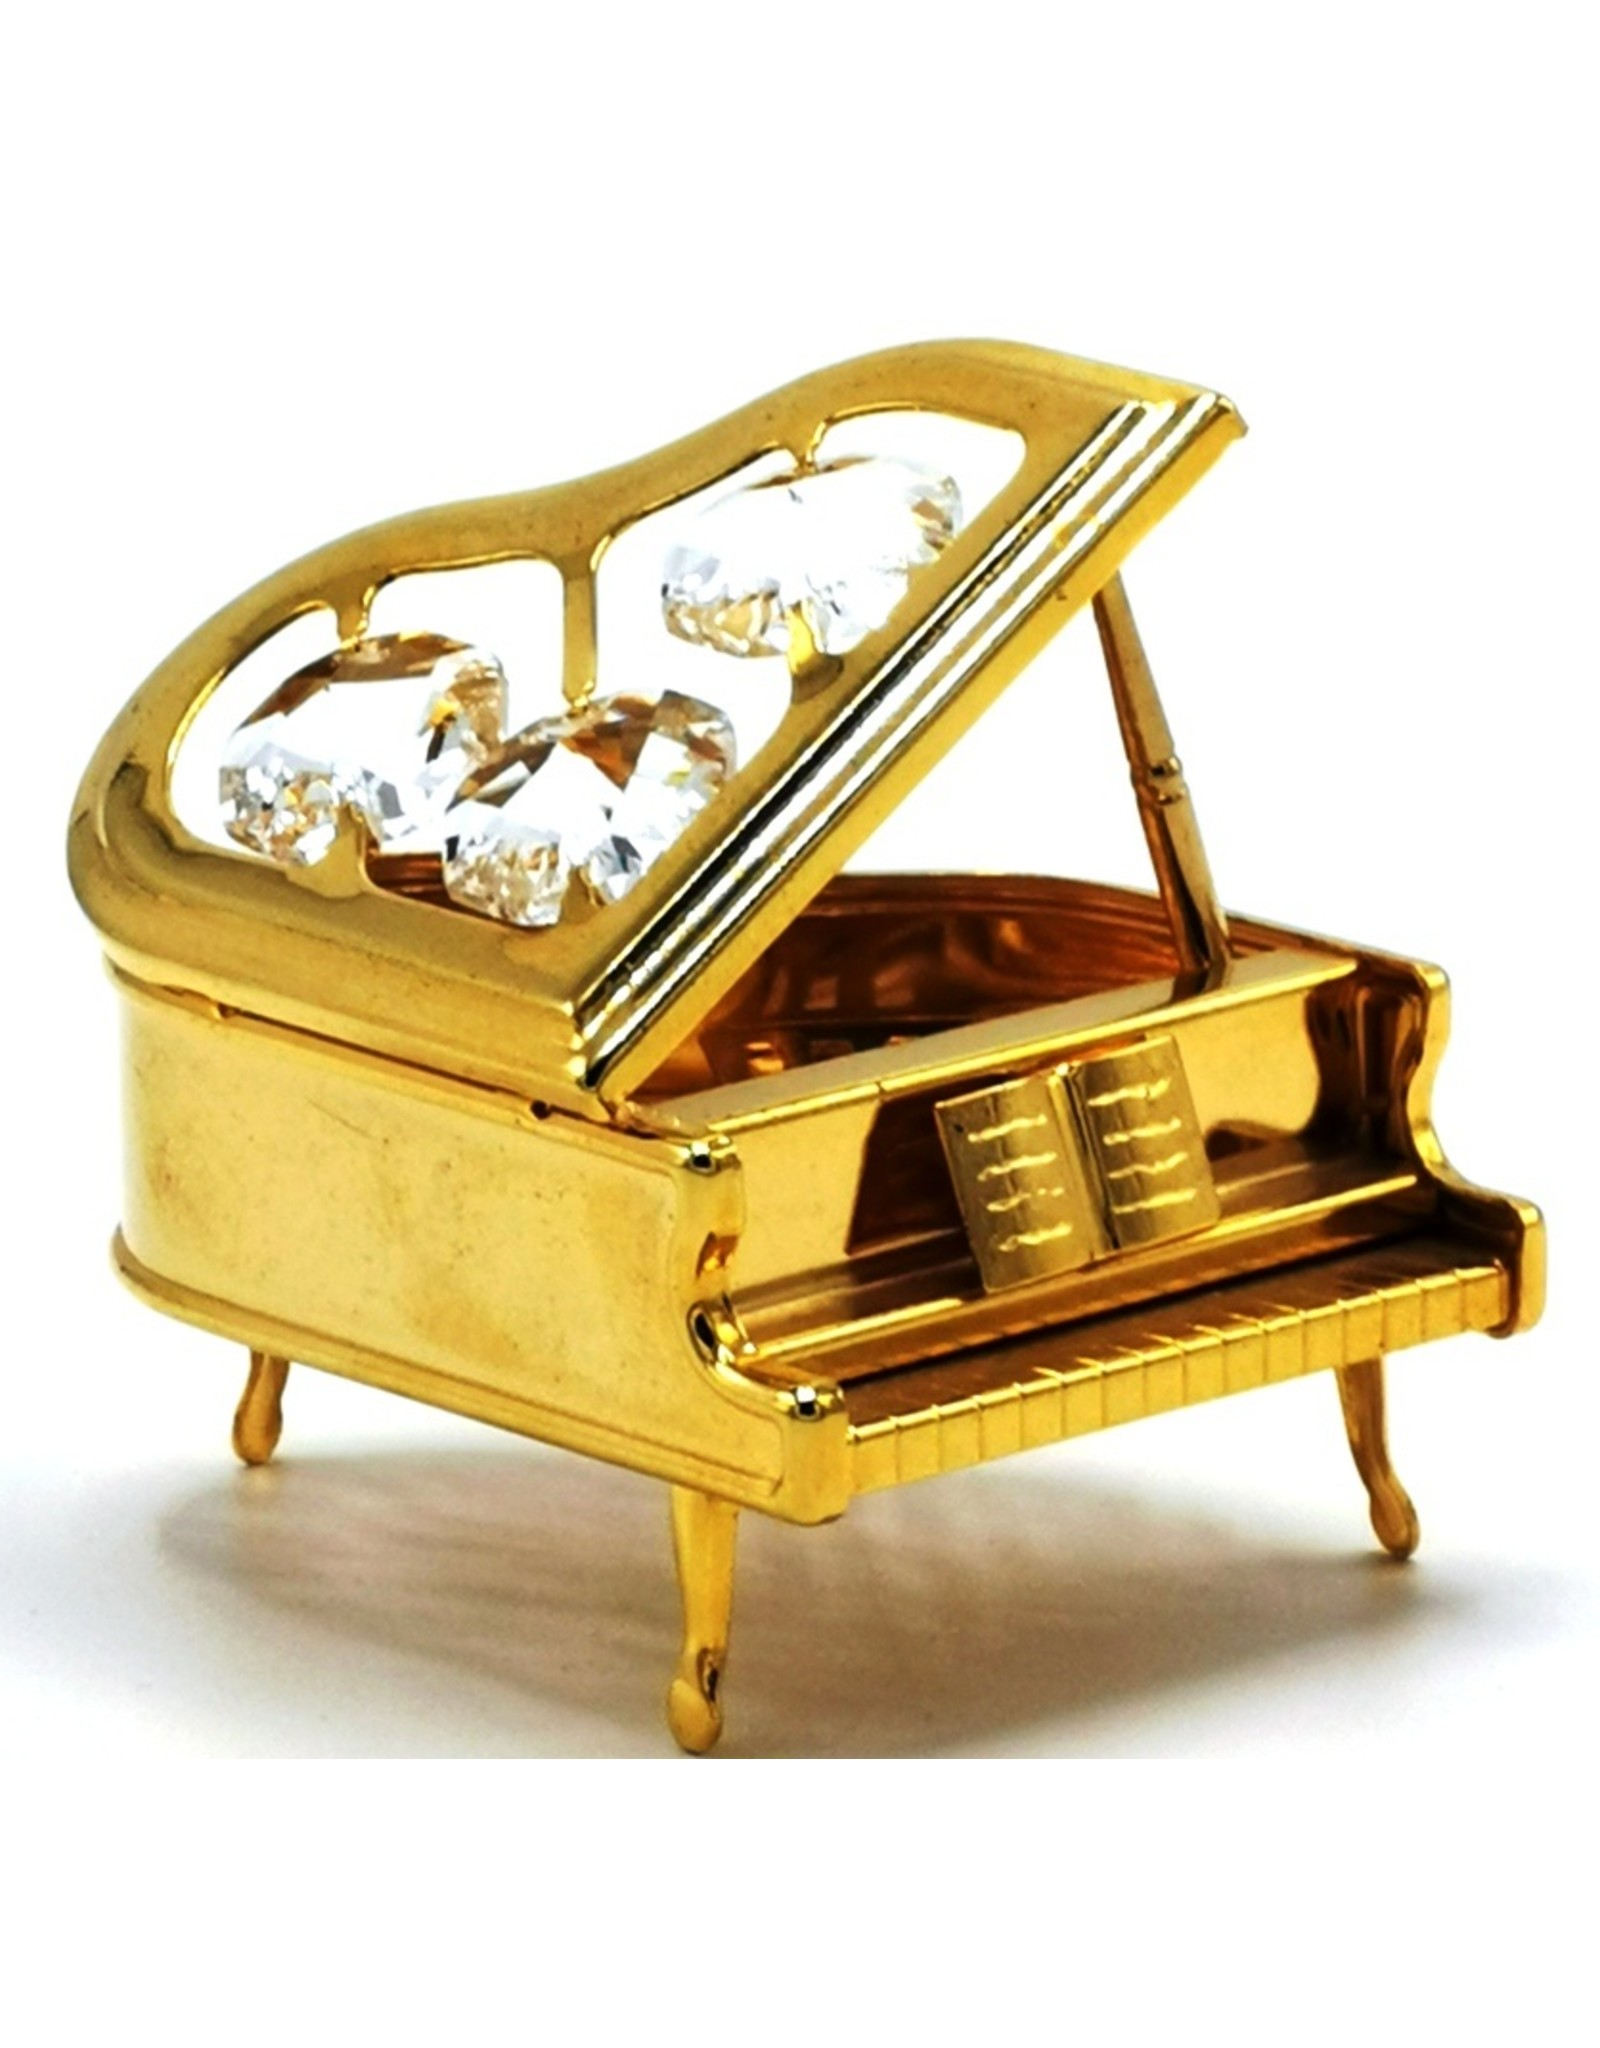 Crystal Temptations Miscellaneous - Miniature Grand Piano.  Gold-plated, with Swarovski